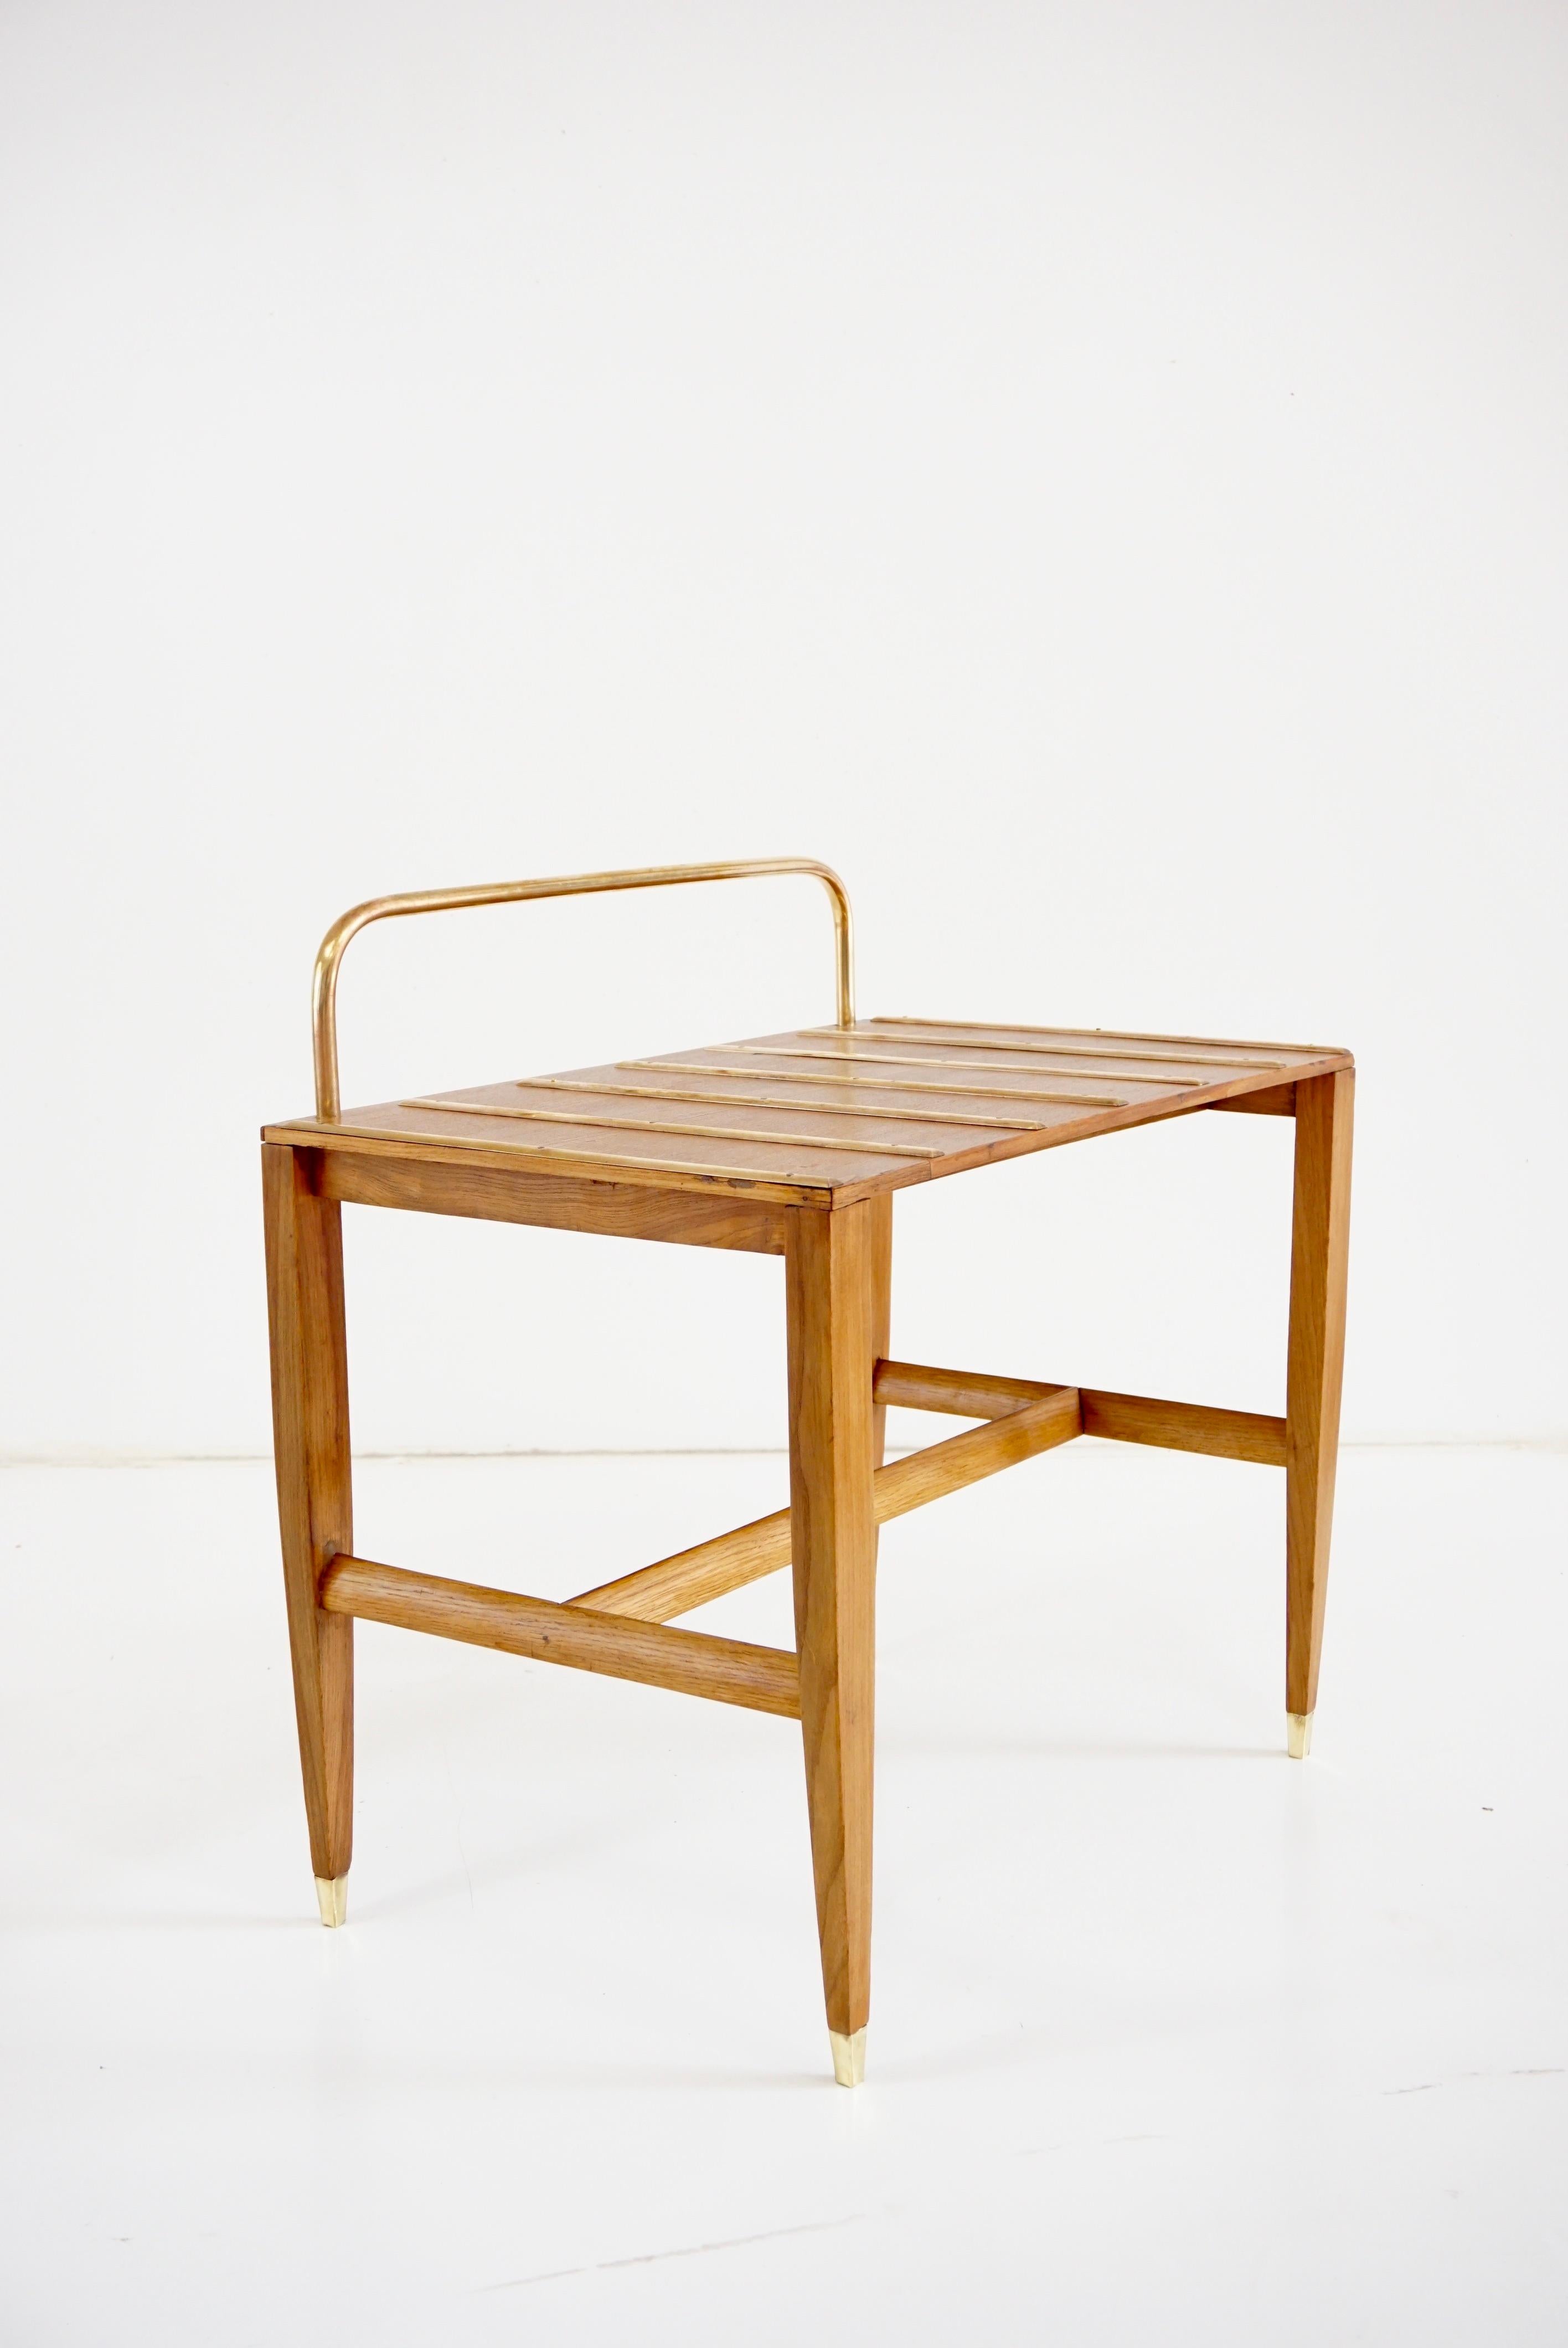 Brass Gio Ponti Walnut Side Table, Luggage Rack for Hotel Royal Naples, 1955 For Sale